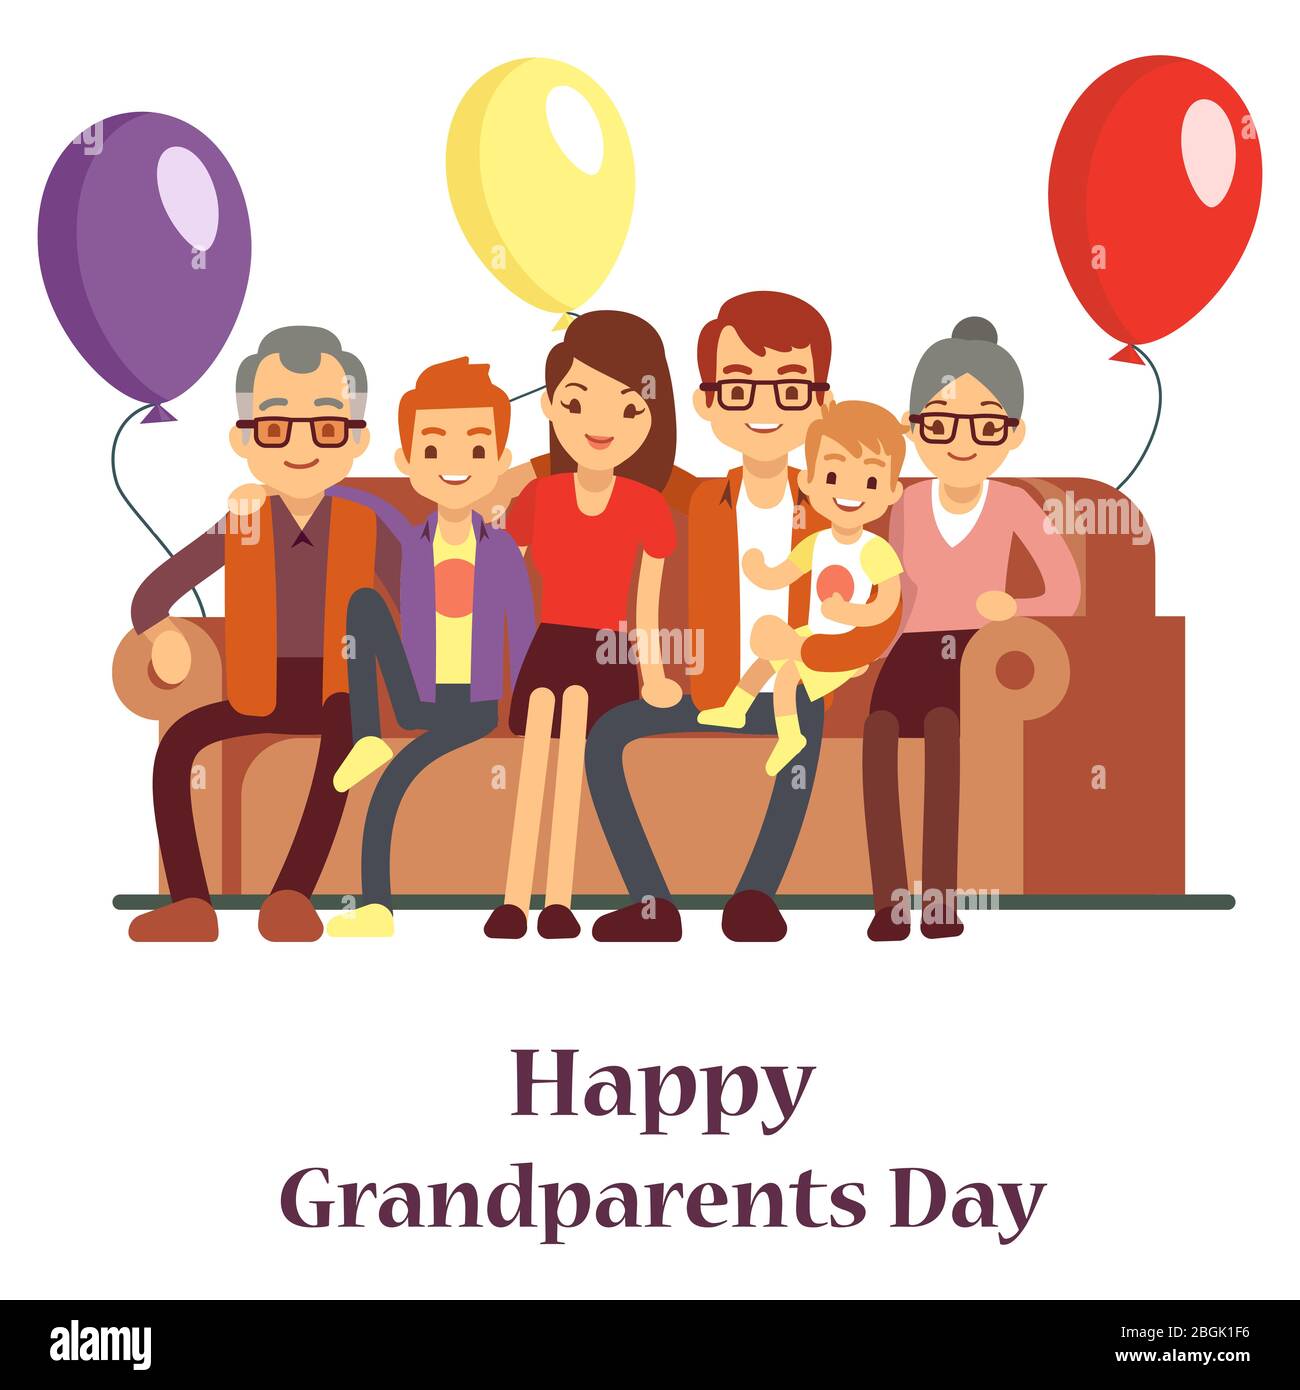 Happy family with grand mother and grandfather. Grandparents Day poster with cartoon character people. Vector grandma and grandpa with grandchildren illustration Stock Vector